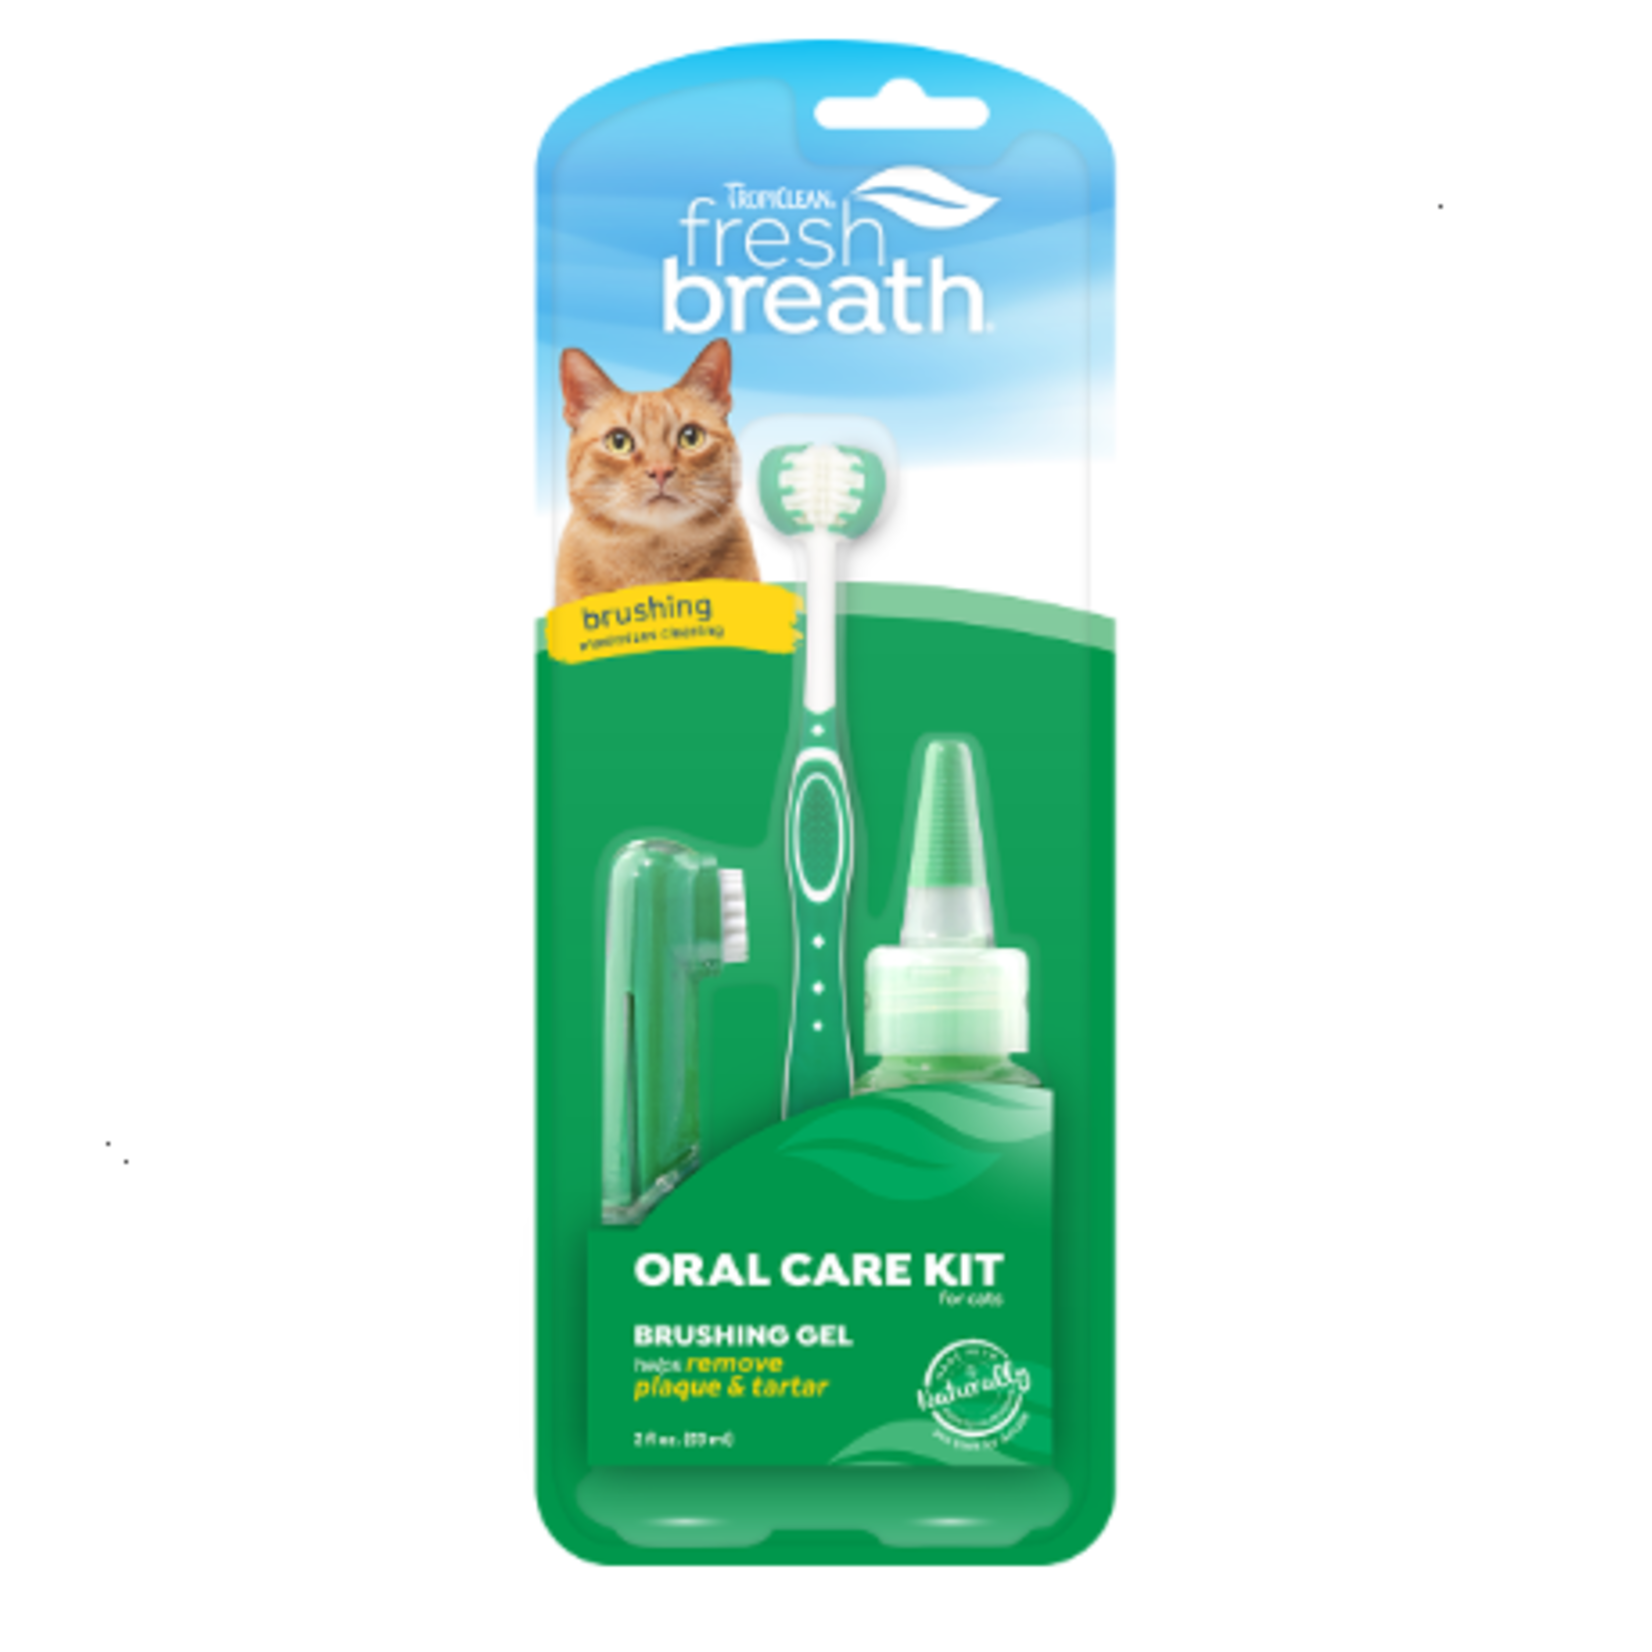 TropiClean Fresh Breath Oral Care Kit for Cats - 2 oz